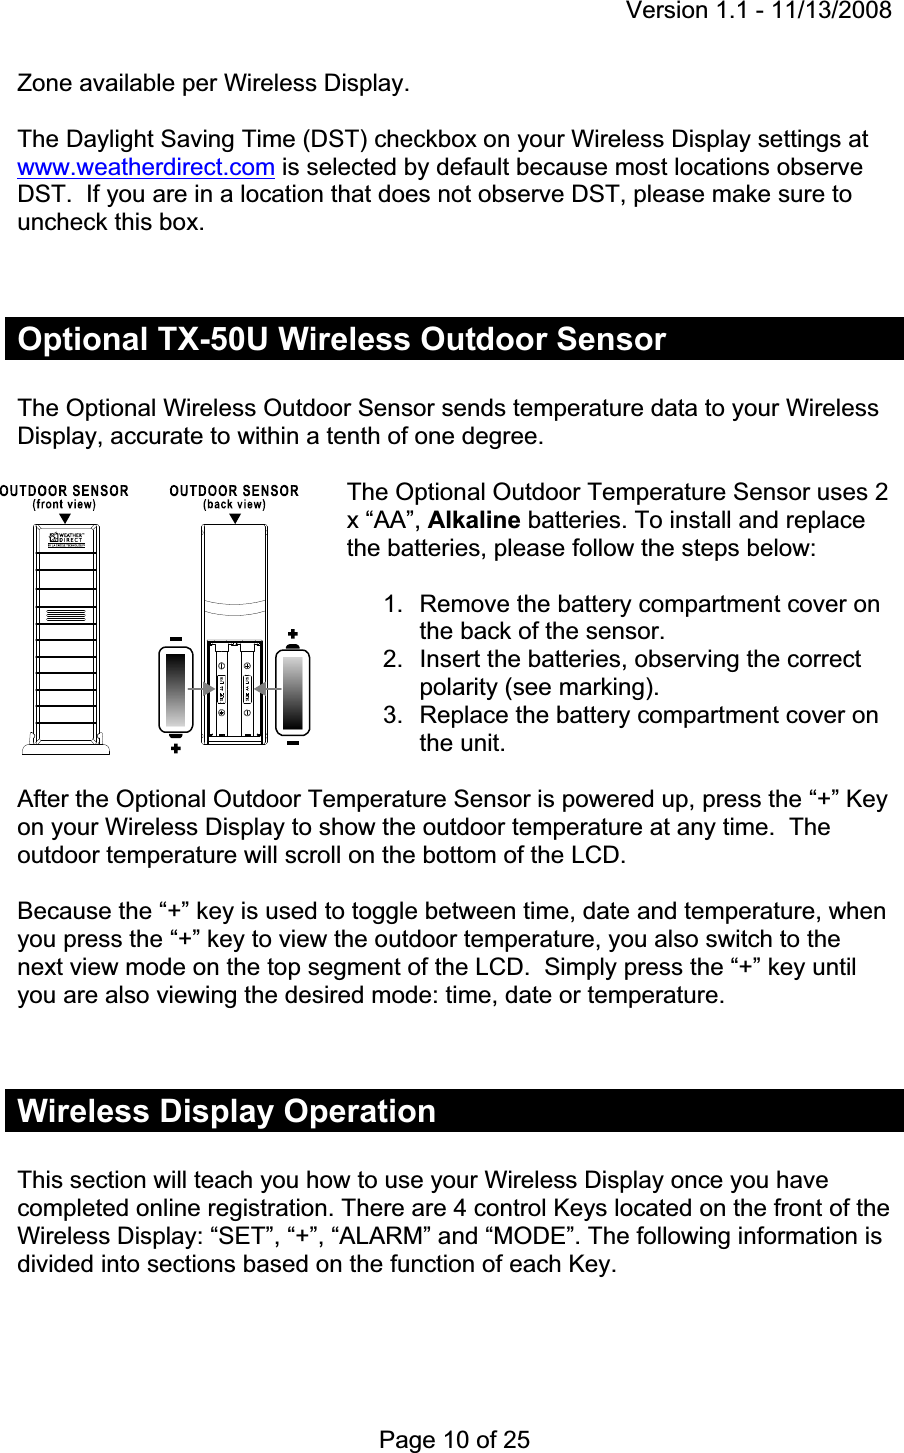 Version 1.1 - 11/13/2008 Page 10 of 25 Zone available per Wireless Display. The Daylight Saving Time (DST) checkbox on your Wireless Display settings at www.weatherdirect.com is selected by default because most locations observe DST.  If you are in a location that does not observe DST, please make sure to uncheck this box.Optional TX-50U Wireless Outdoor Sensor The Optional Wireless Outdoor Sensor sends temperature data to your Wireless Display, accurate to within a tenth of one degree.The Optional Outdoor Temperature Sensor uses 2 x “AA”, Alkaline batteries. To install and replace the batteries, please follow the steps below: 1.  Remove the battery compartment cover on the back of the sensor. 2.  Insert the batteries, observing the correct polarity (see marking). 3.  Replace the battery compartment cover on the unit. After the Optional Outdoor Temperature Sensor is powered up, press the “+” Key on your Wireless Display to show the outdoor temperature at any time.  The outdoor temperature will scroll on the bottom of the LCD.Because the “+” key is used to toggle between time, date and temperature, when you press the “+” key to view the outdoor temperature, you also switch to the next view mode on the top segment of the LCD.  Simply press the “+” key until you are also viewing the desired mode: time, date or temperature. Wireless Display Operation This section will teach you how to use your Wireless Display once you have completed online registration. There are 4 control Keys located on the front of the Wireless Display: “SET”, “+”, “ALARM” and “MODE”. The following information is divided into sections based on the function of each Key. 